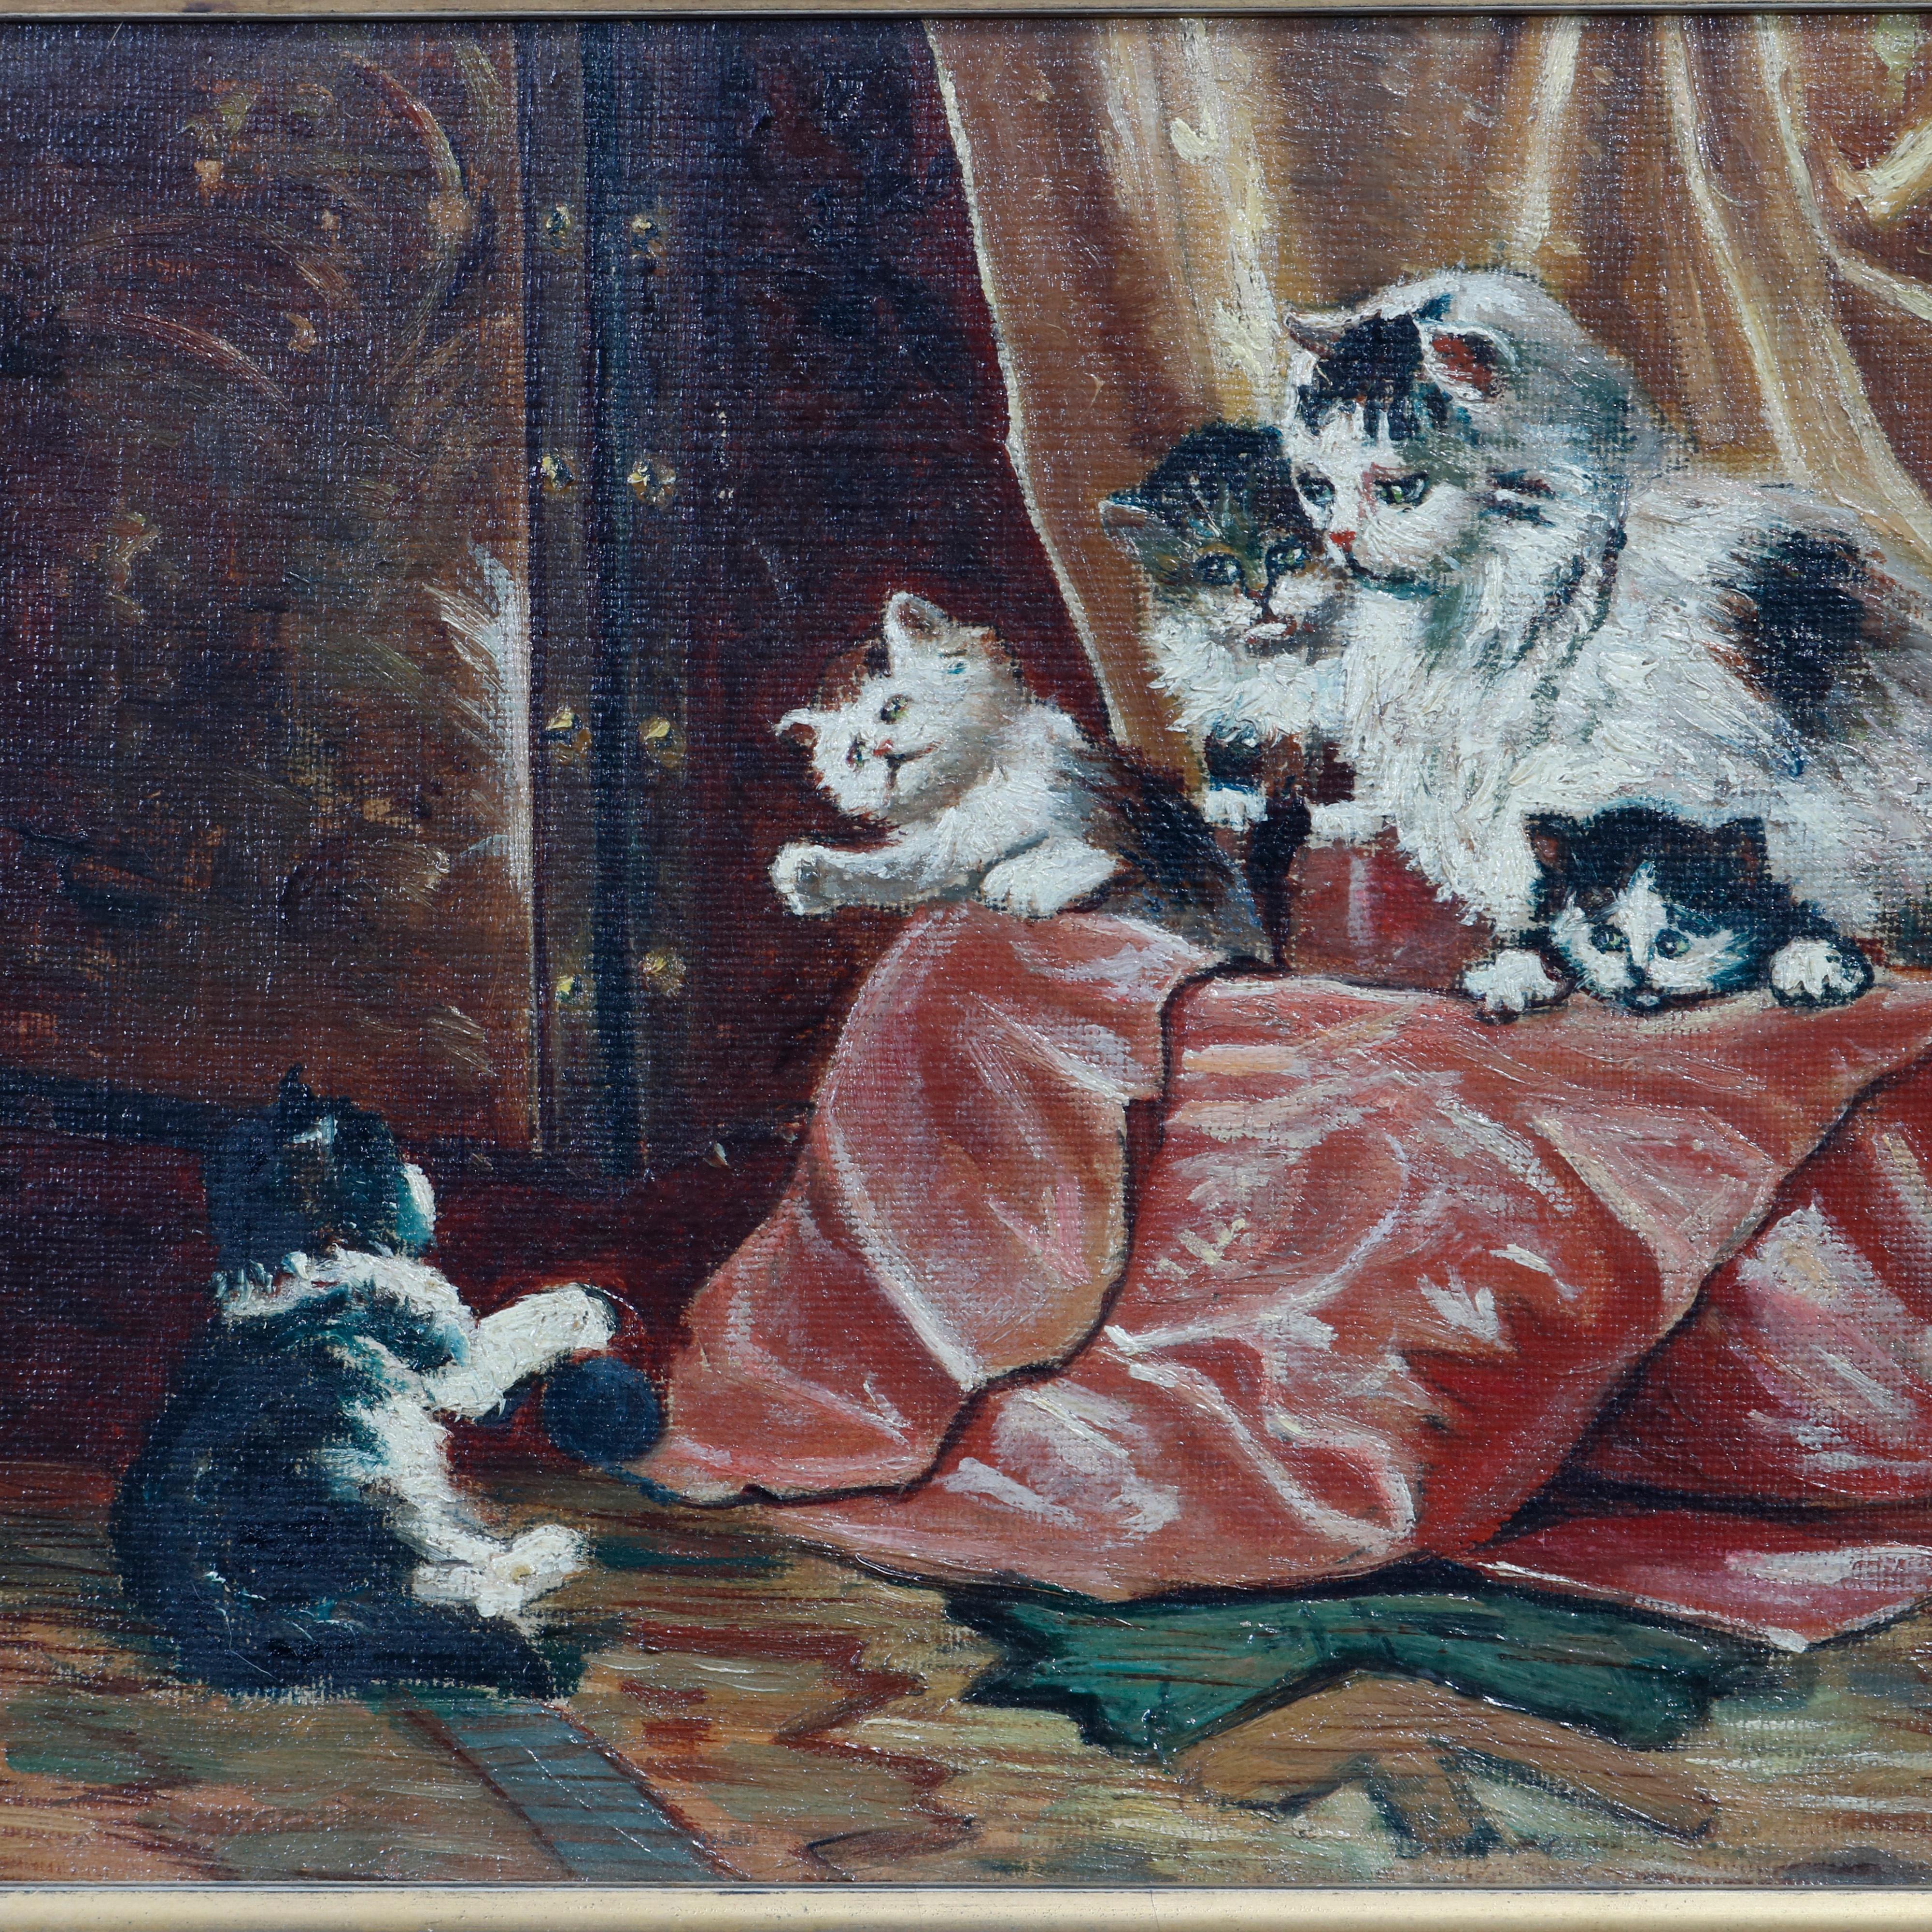 An antique Victorian oil painting offers oil on canvas interior scene with playful kittens, artist signed HMG and dated illegible lower right, seated in giltwood frame, c1890.

Measures: 12.75